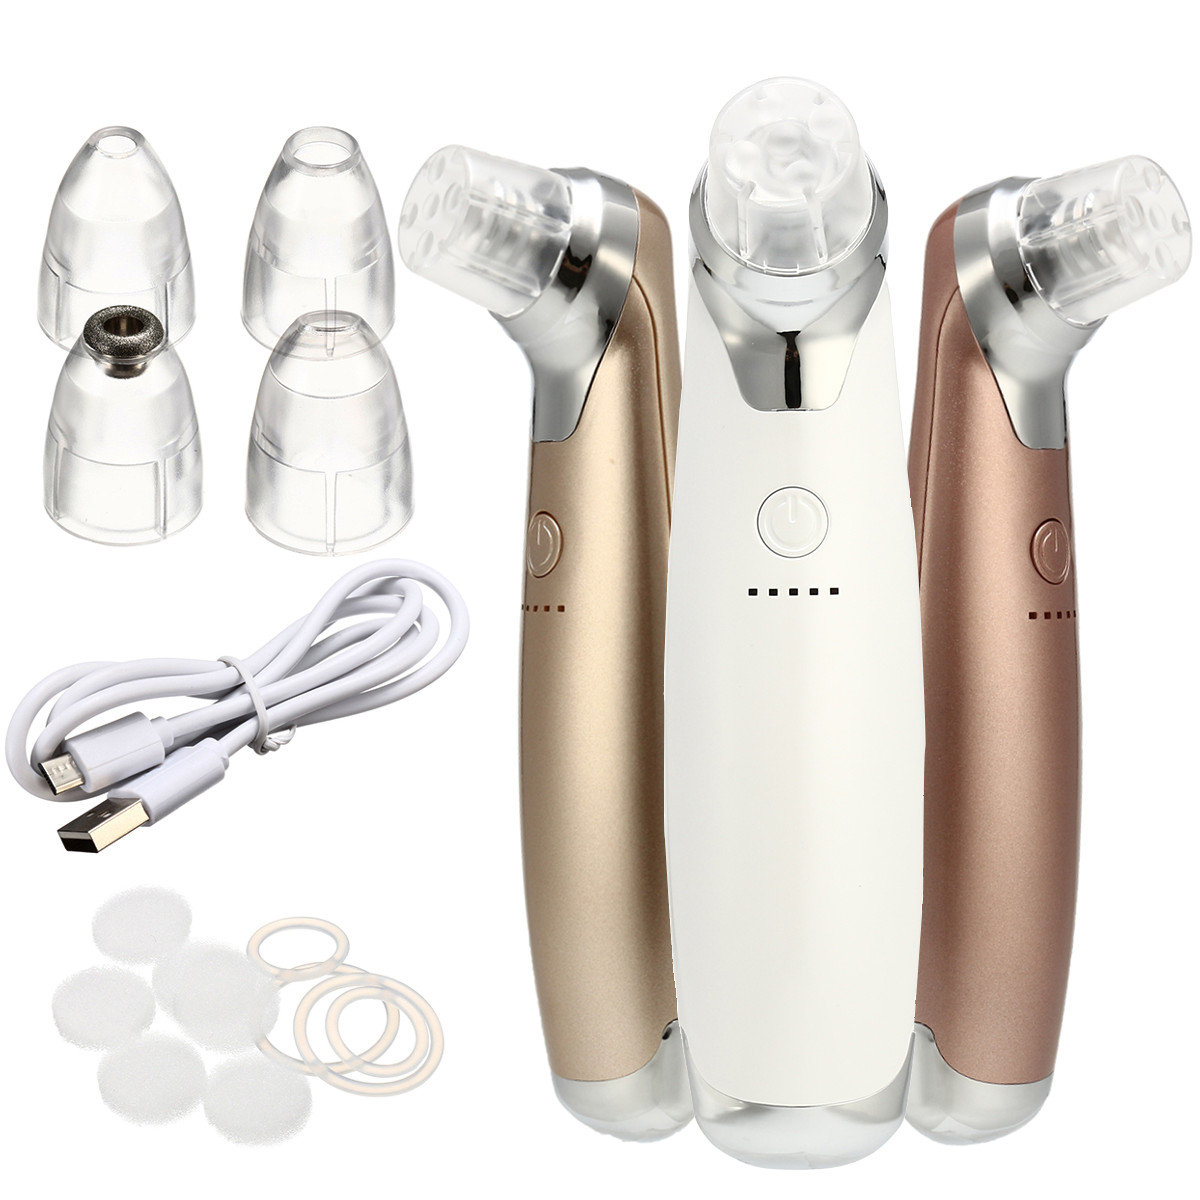 

Electric Facial Cleansing Instrument Blackhead Acne Pore Remover USB Rechargeable Cleaner, Rose gold